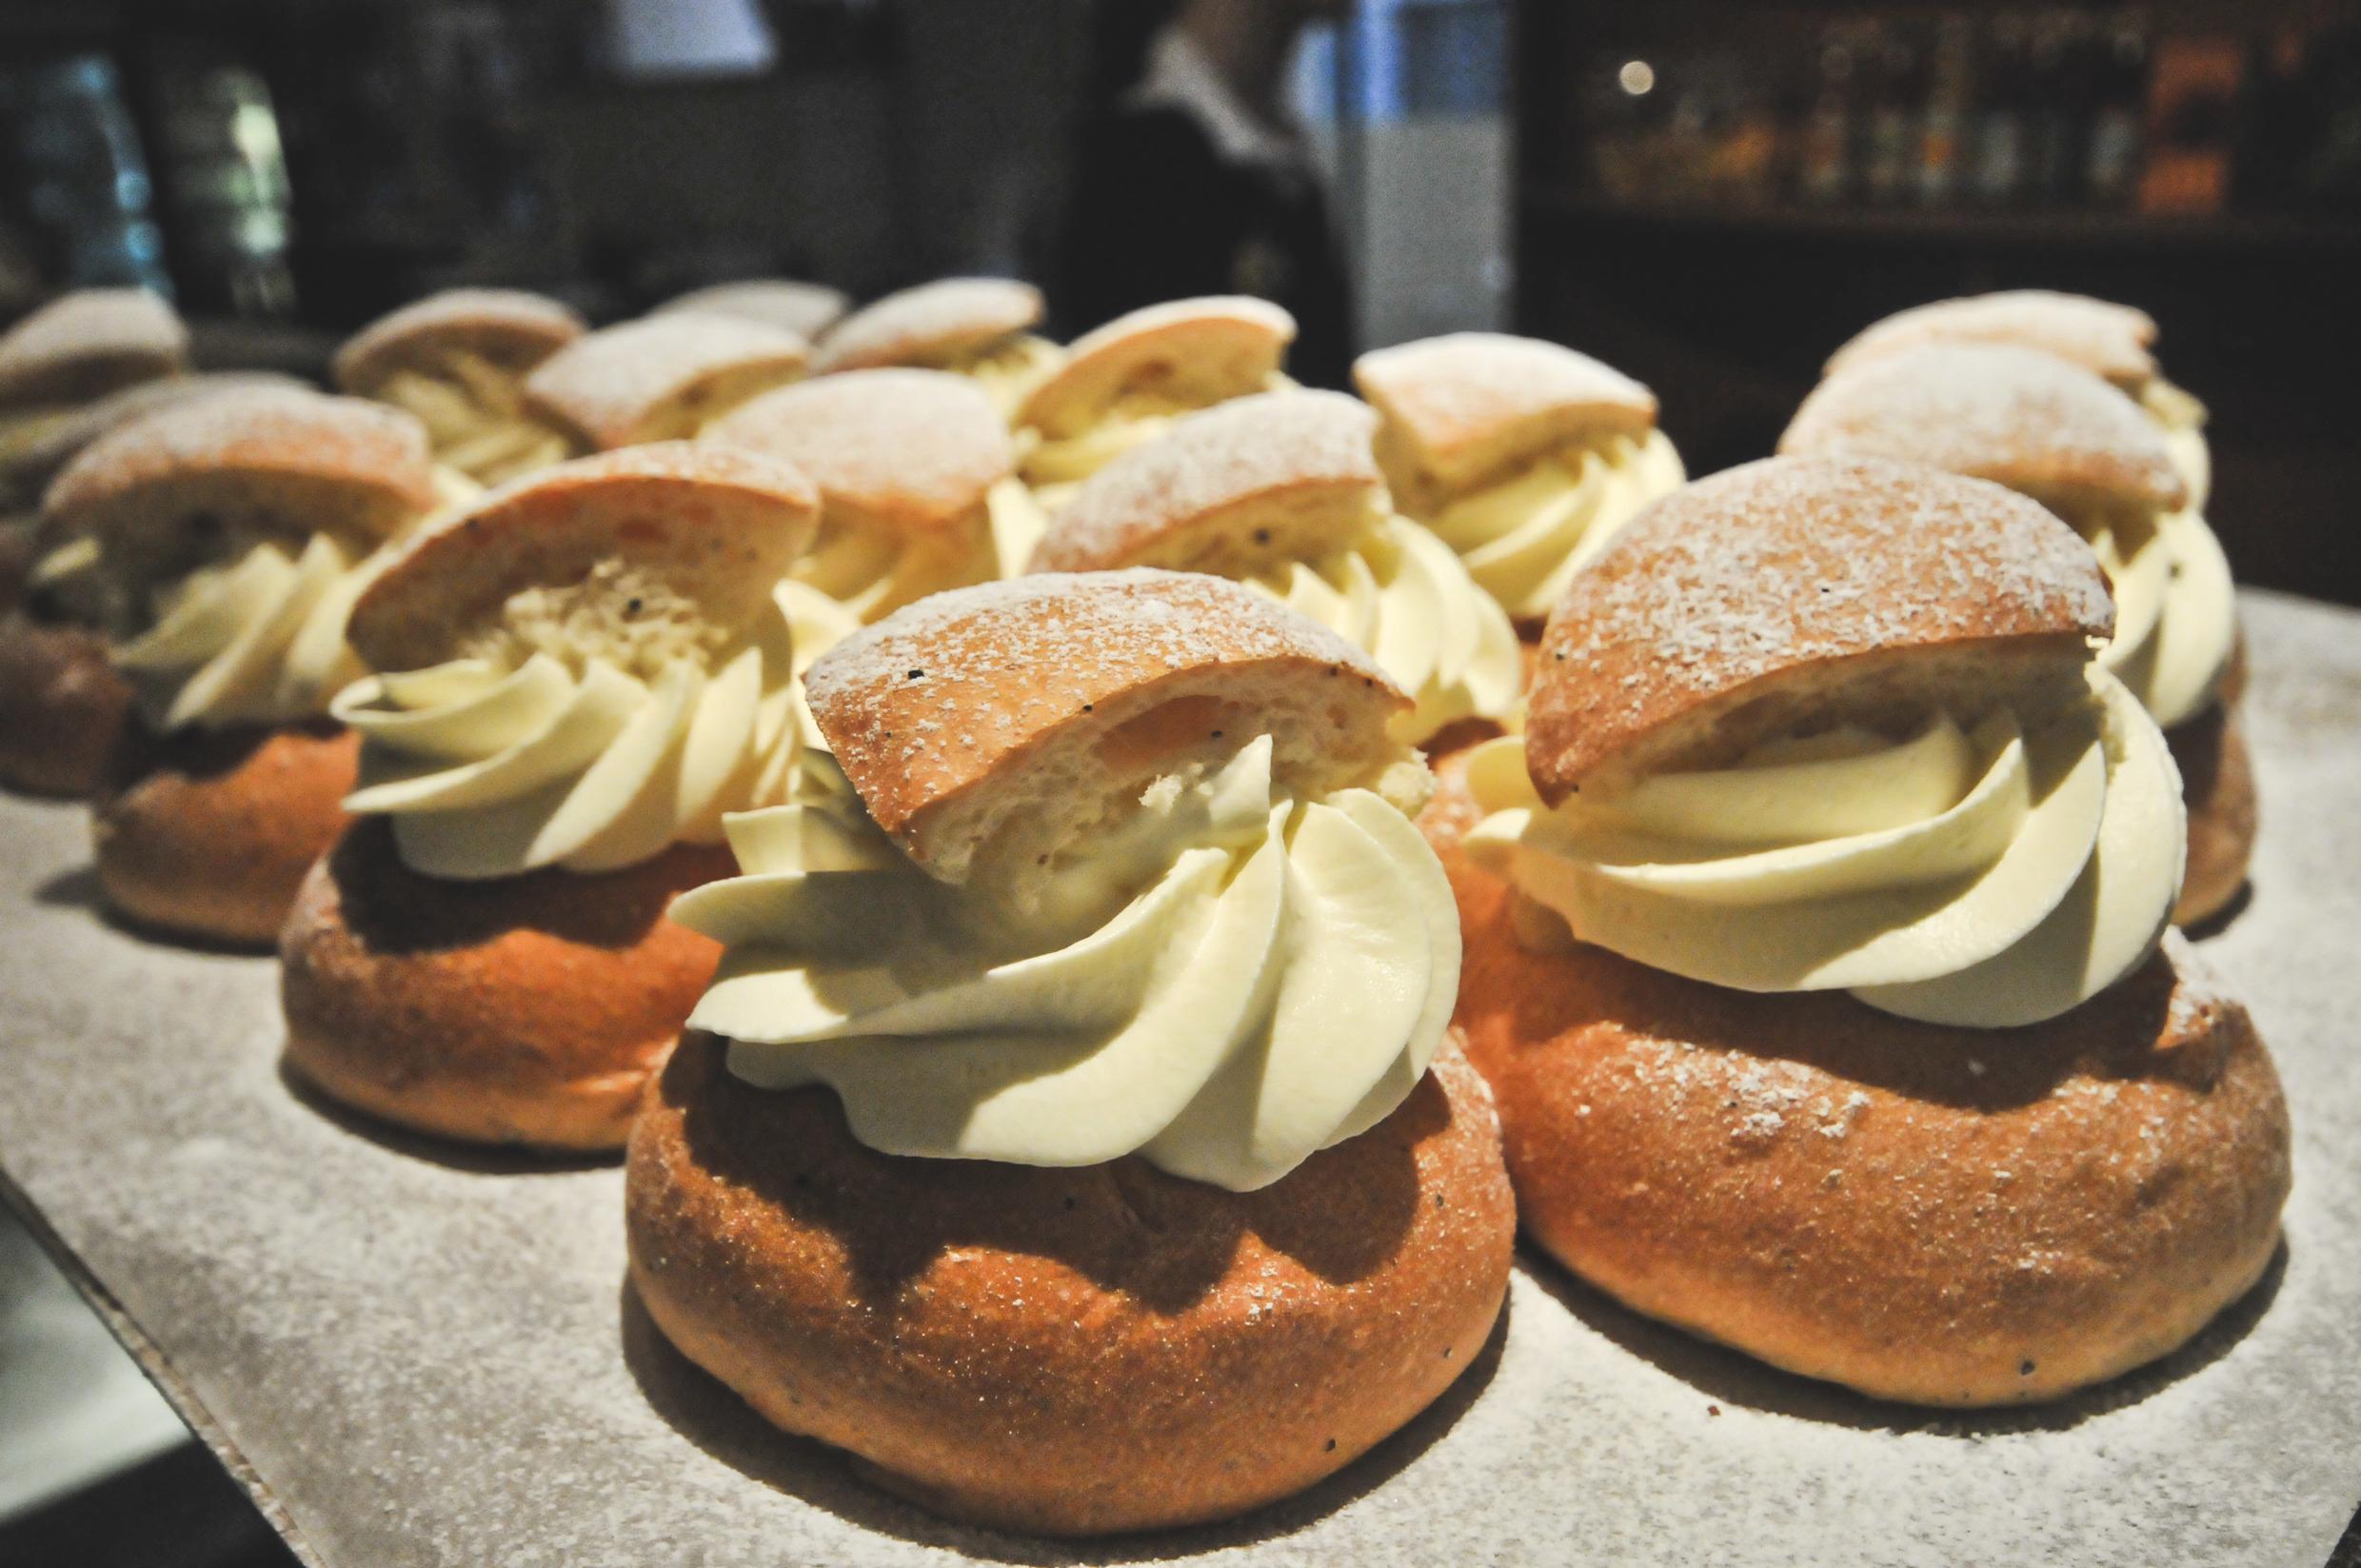 Semlor, buns with whipped cream, are lined up on display.